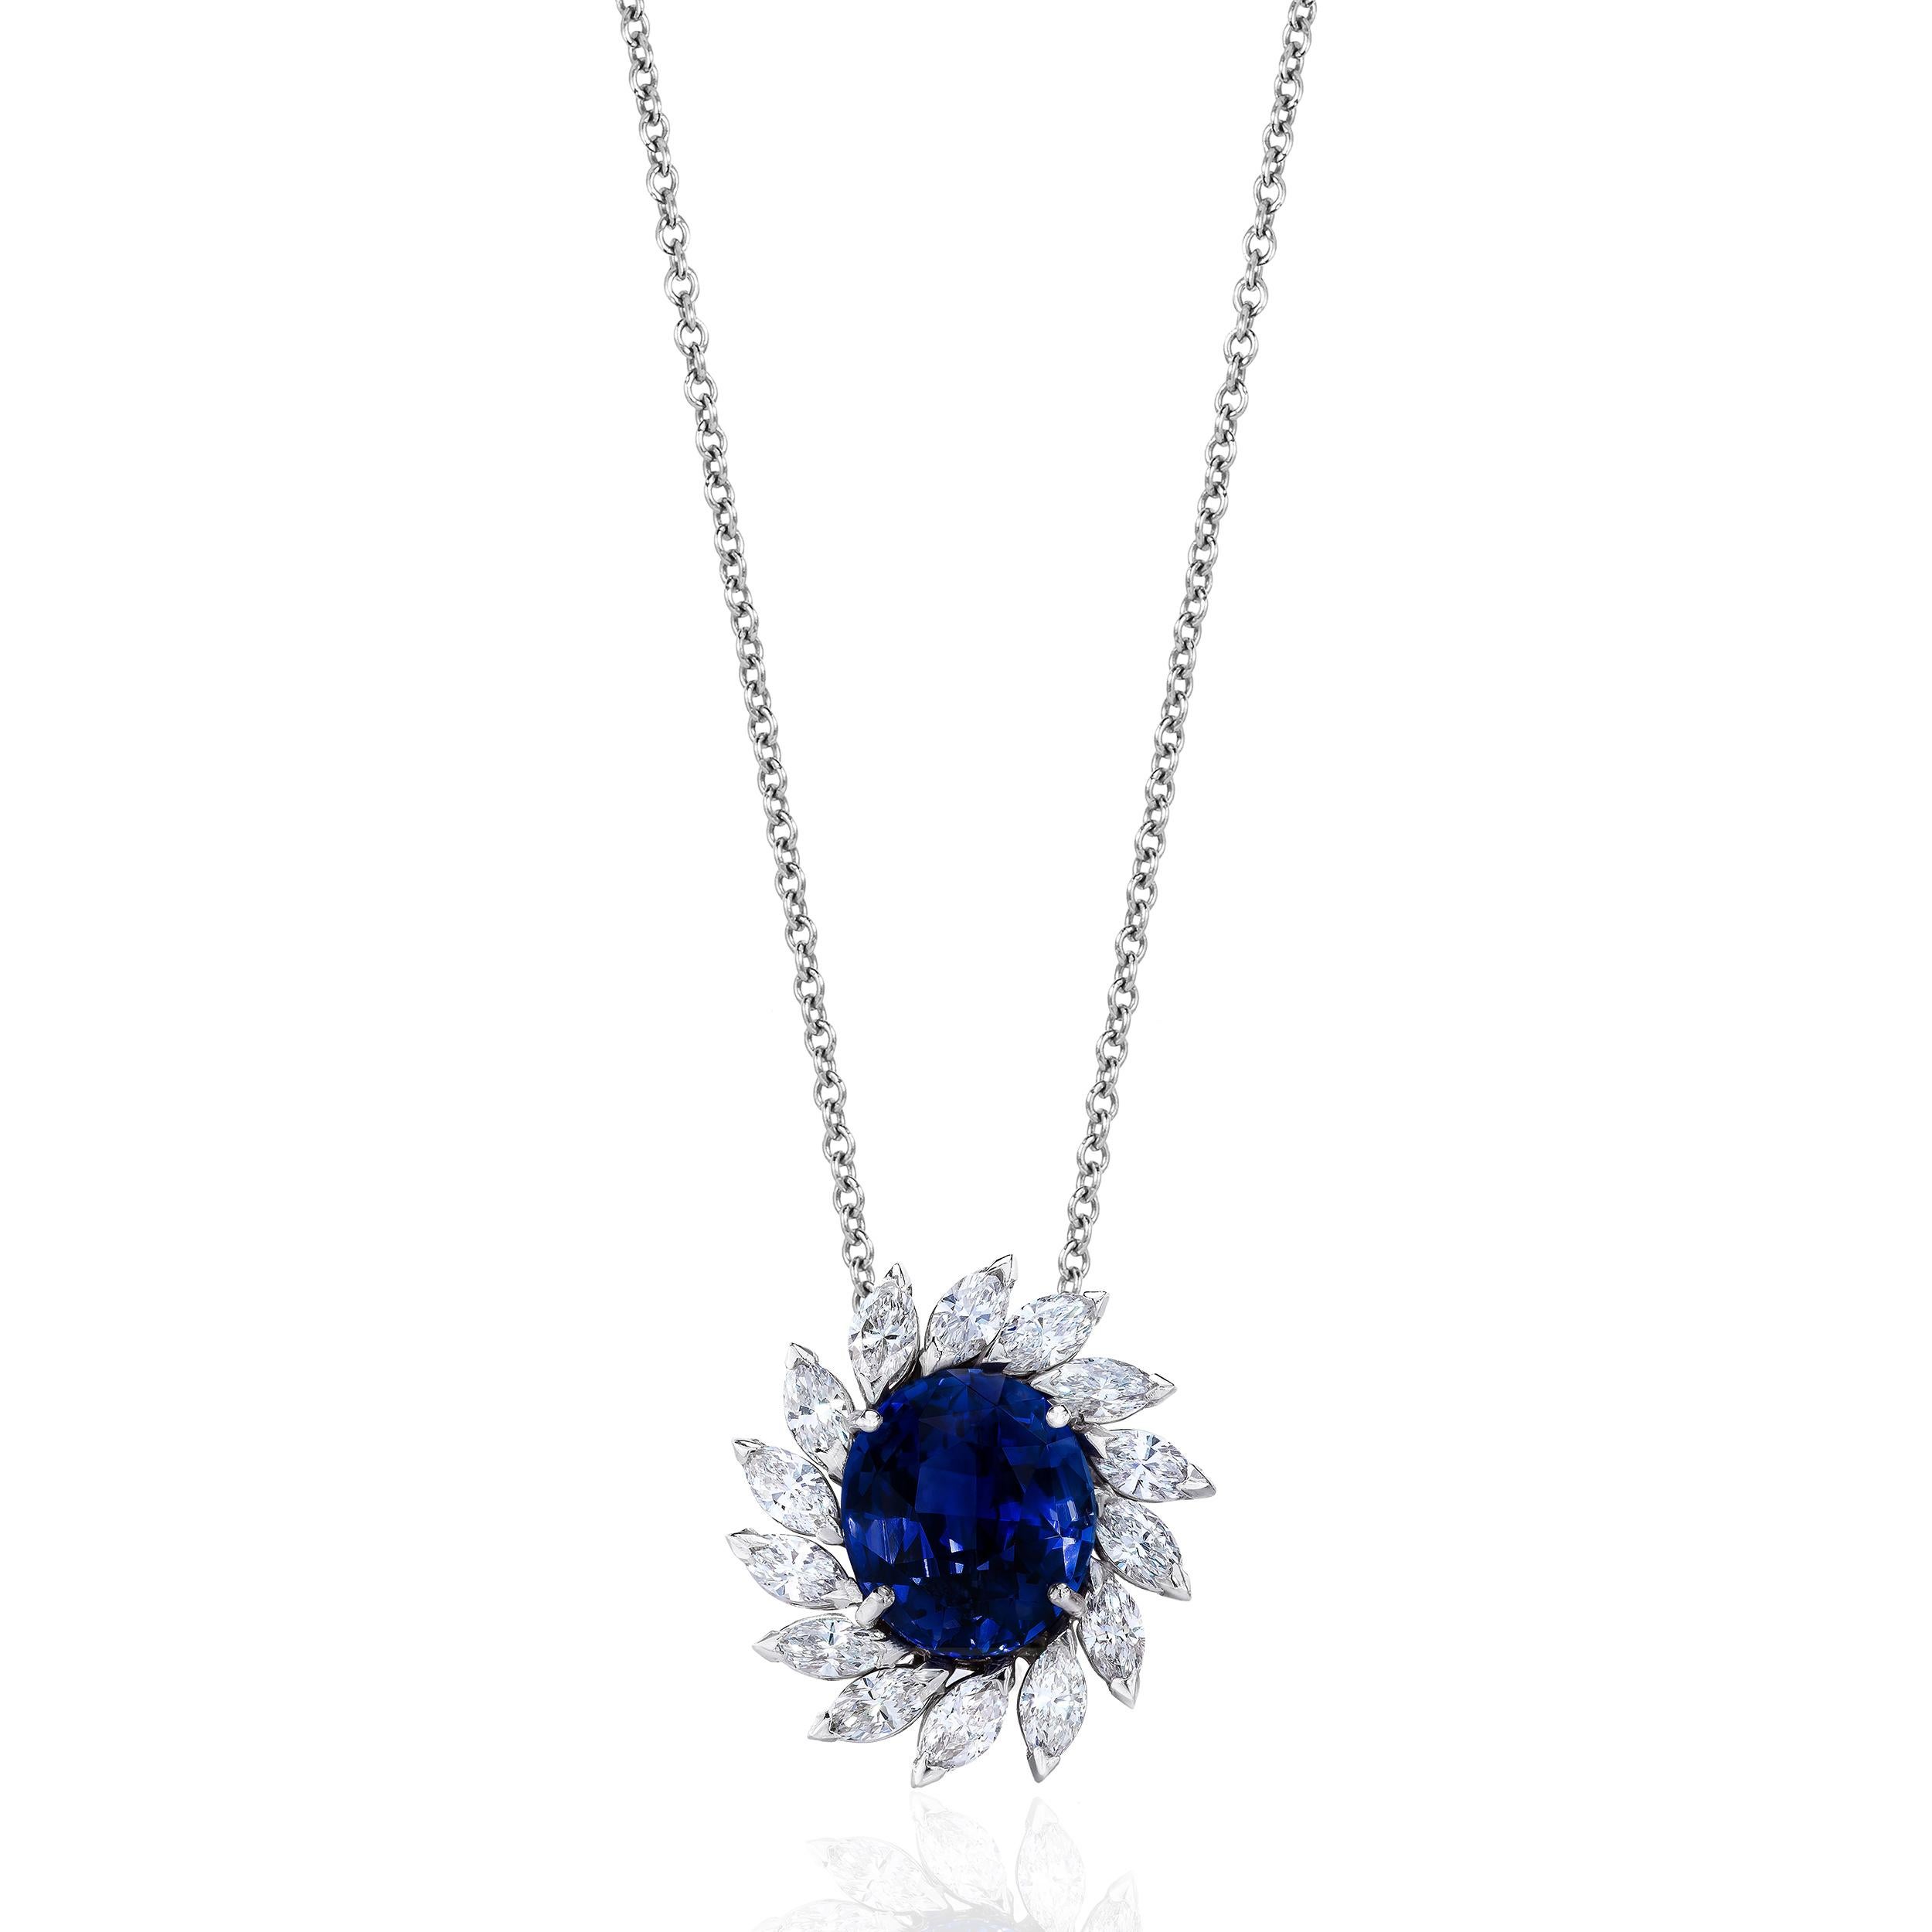 Centered upon a beautiful and rich colored Sapphire weighing approximately 4.50 Carats.
Surrounded by Marquise Cut Diamonds weighing 1.20 Carats.
Set in 18 Karat White Gold.

Jump chain measuring 18-20 inches.
